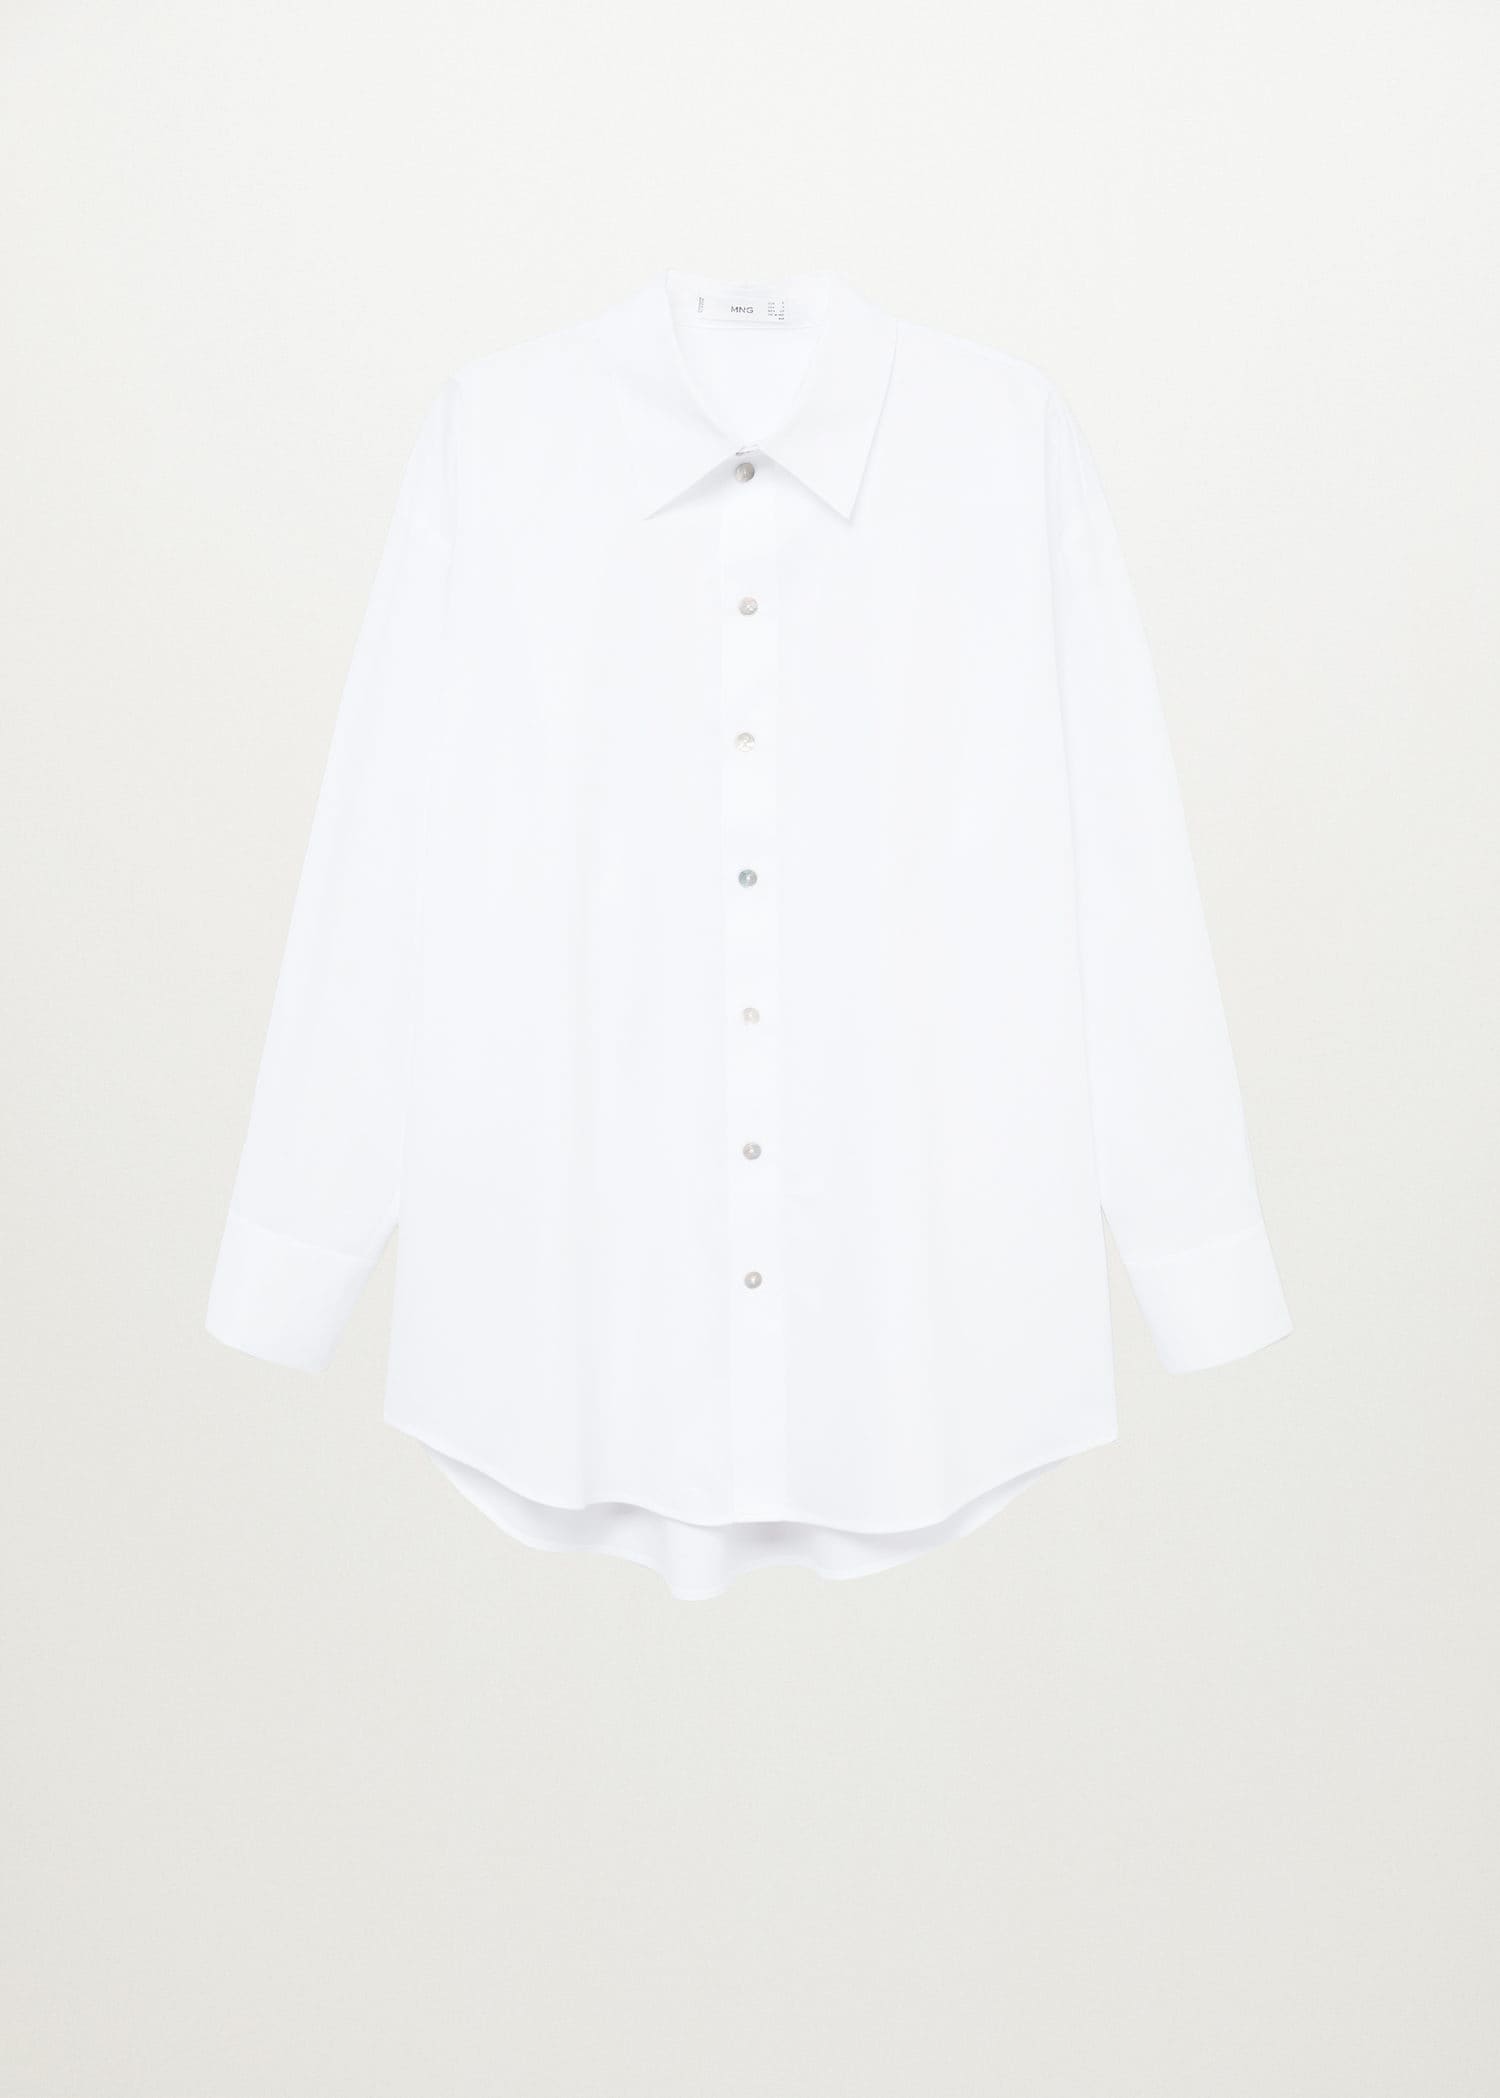 In Fashion | Spring Style Staple: The White Shirt